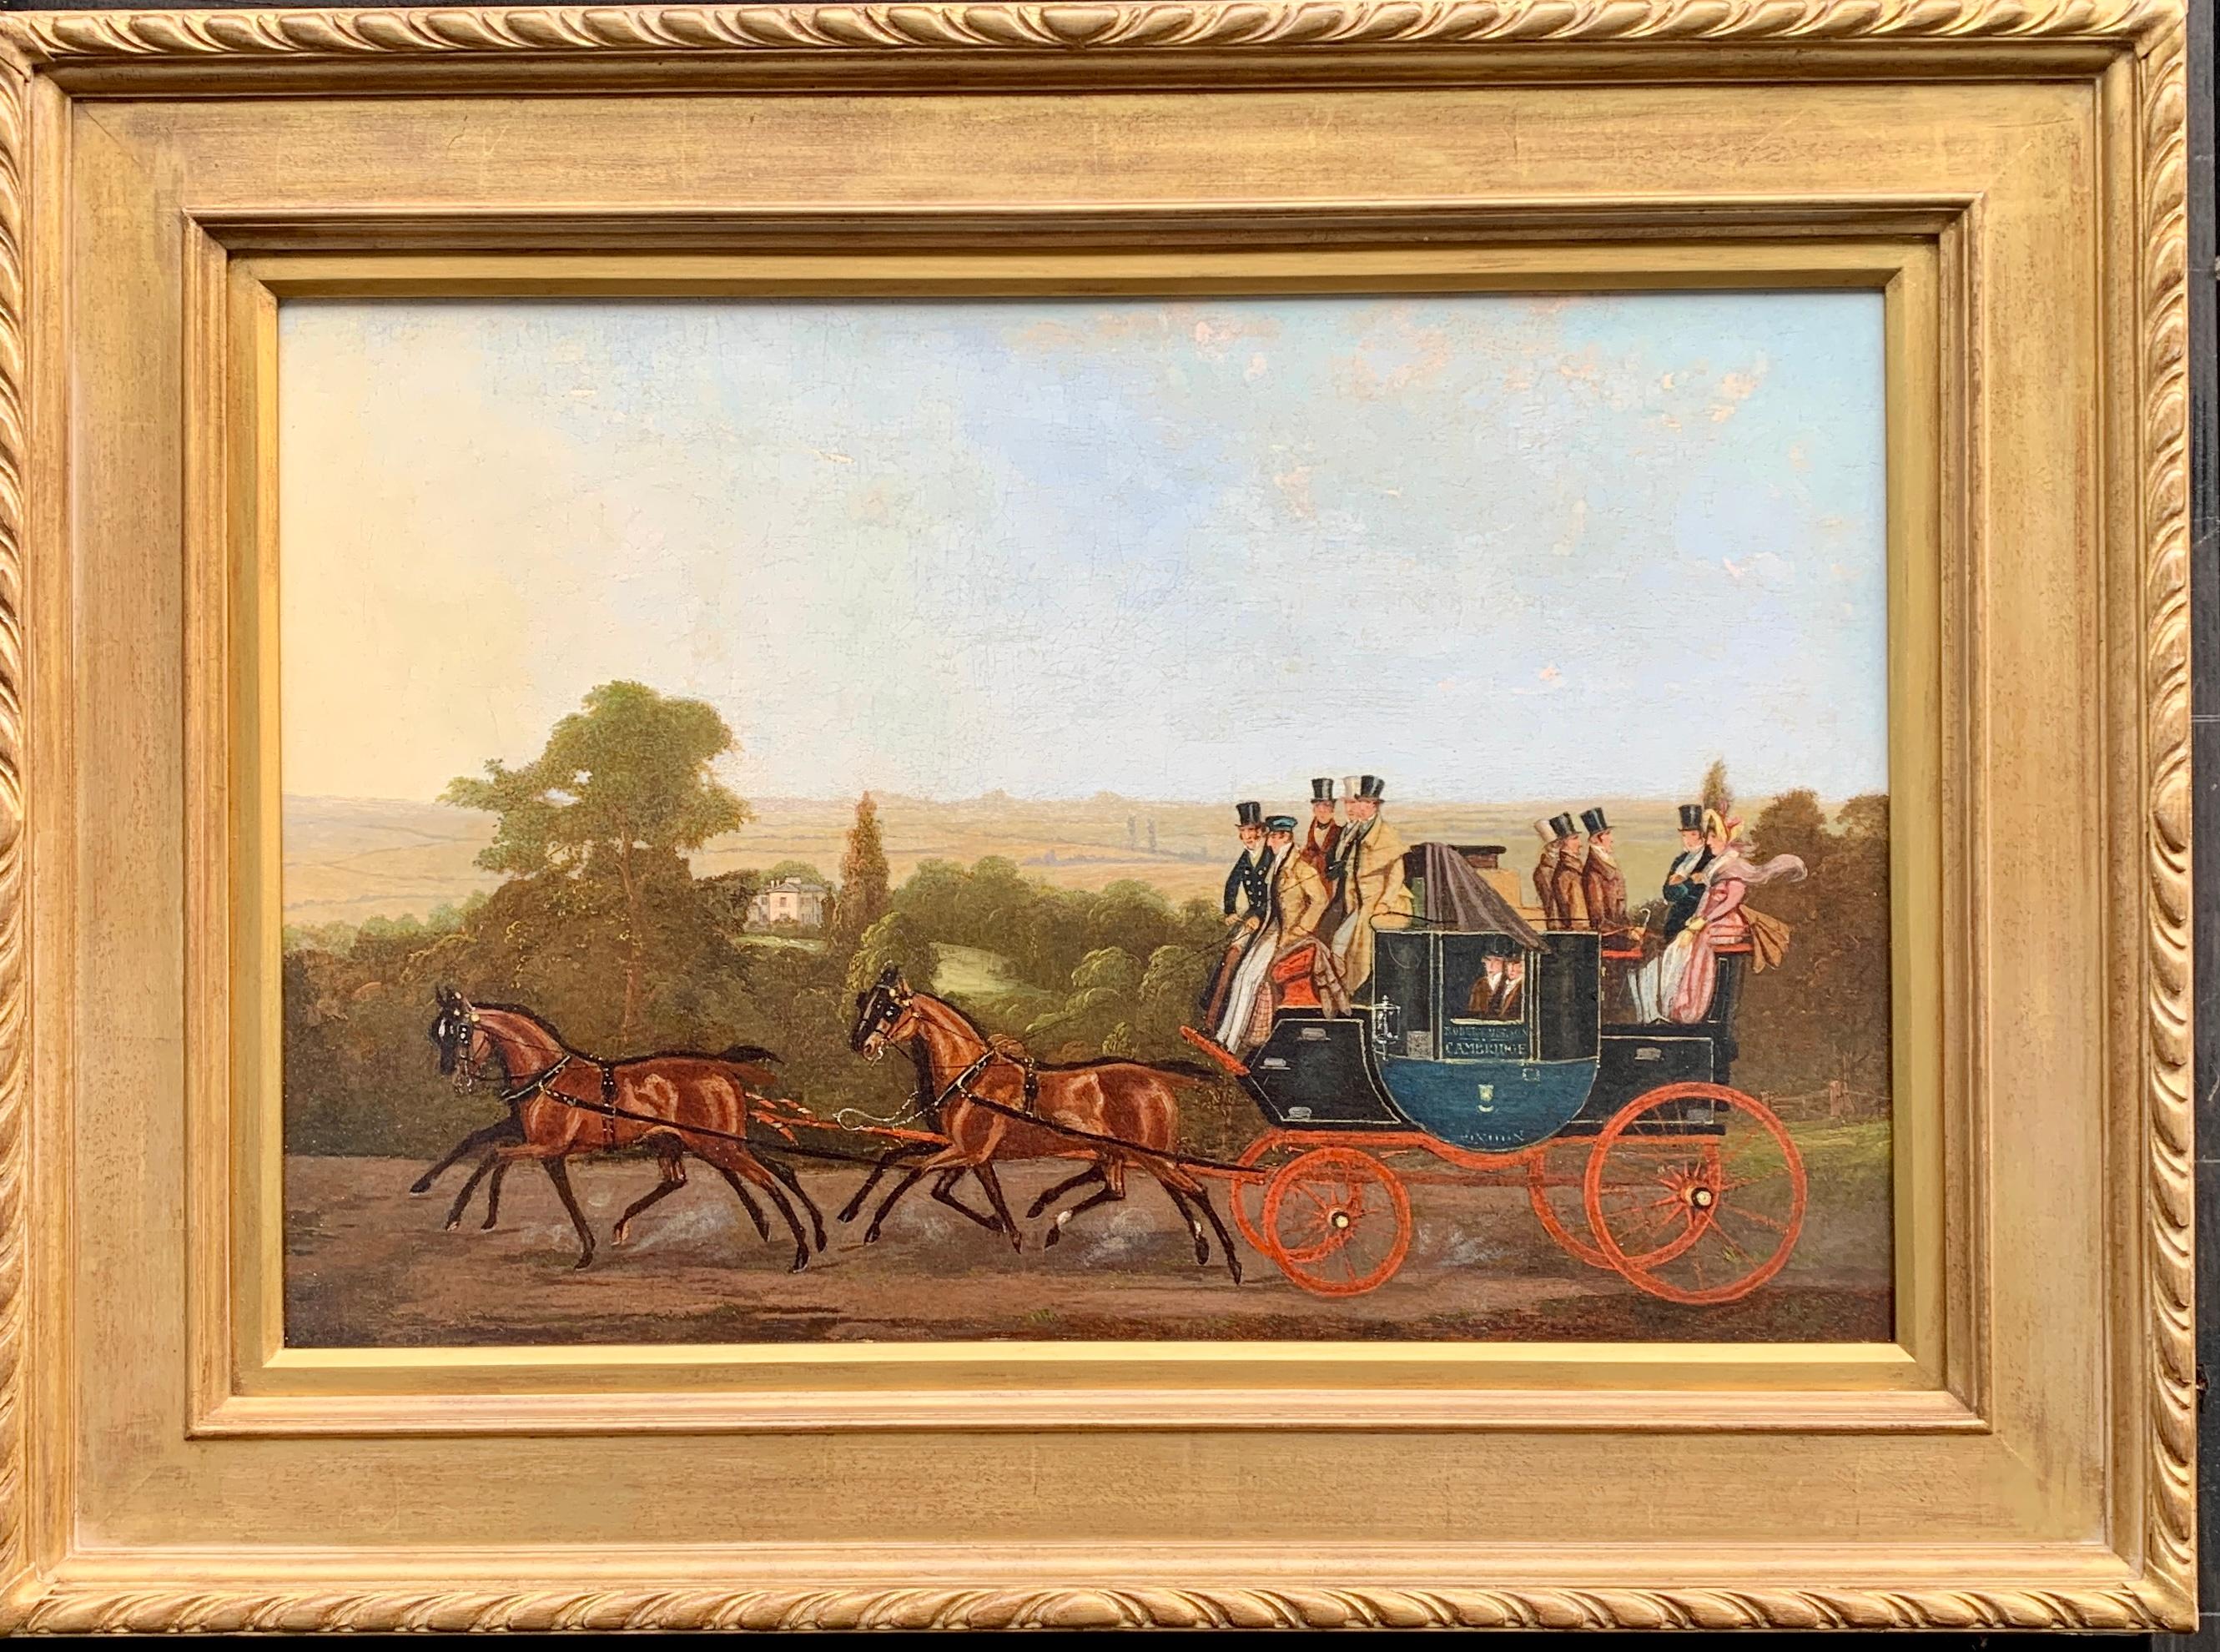 Unknown Landscape Painting - Late 19thC English Coach and horses in a landscape. Cambridge to London Coach